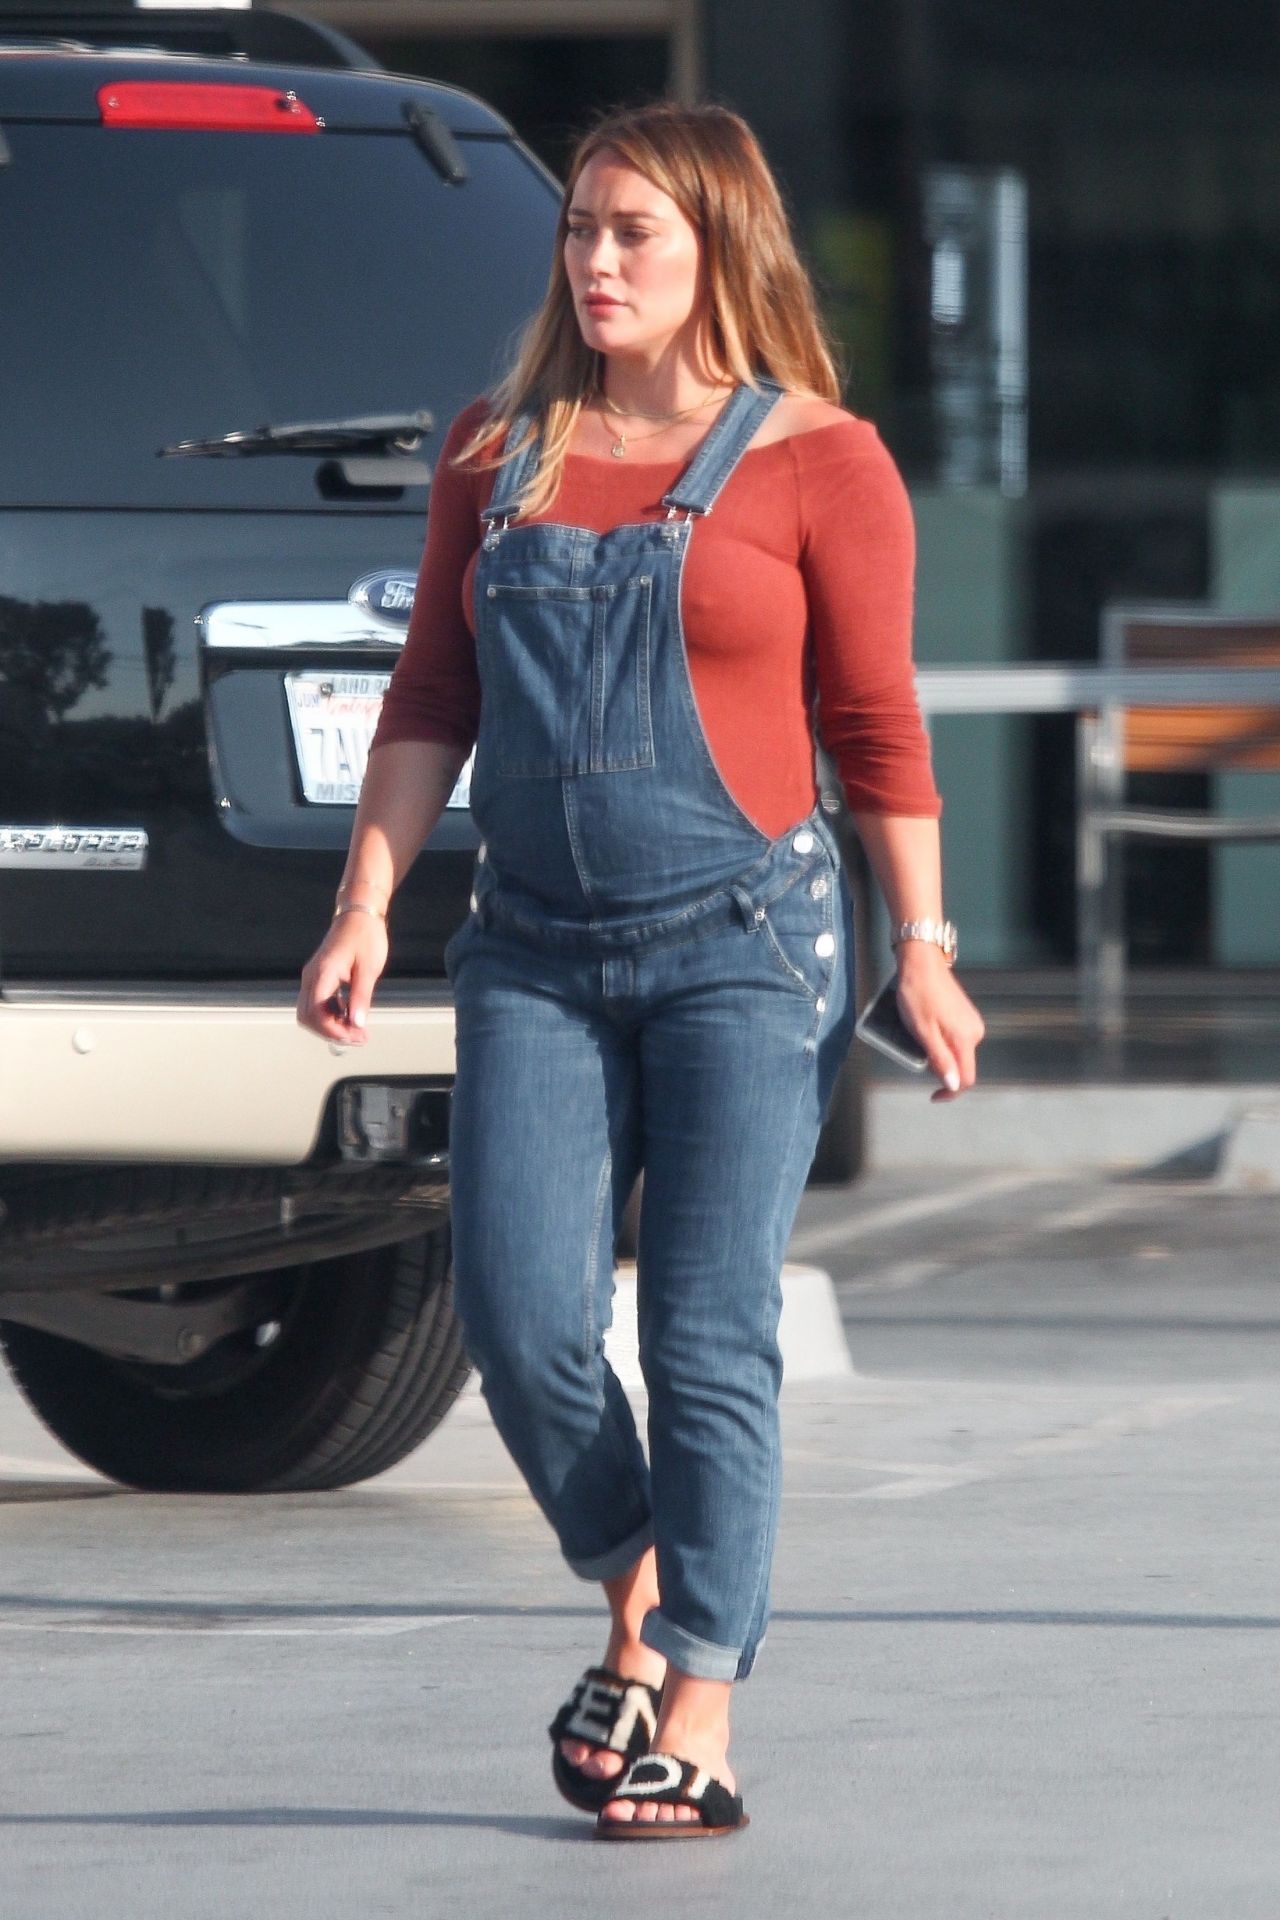 Hilary Duff - Out in Studio City 08/02/20181280 x 1920